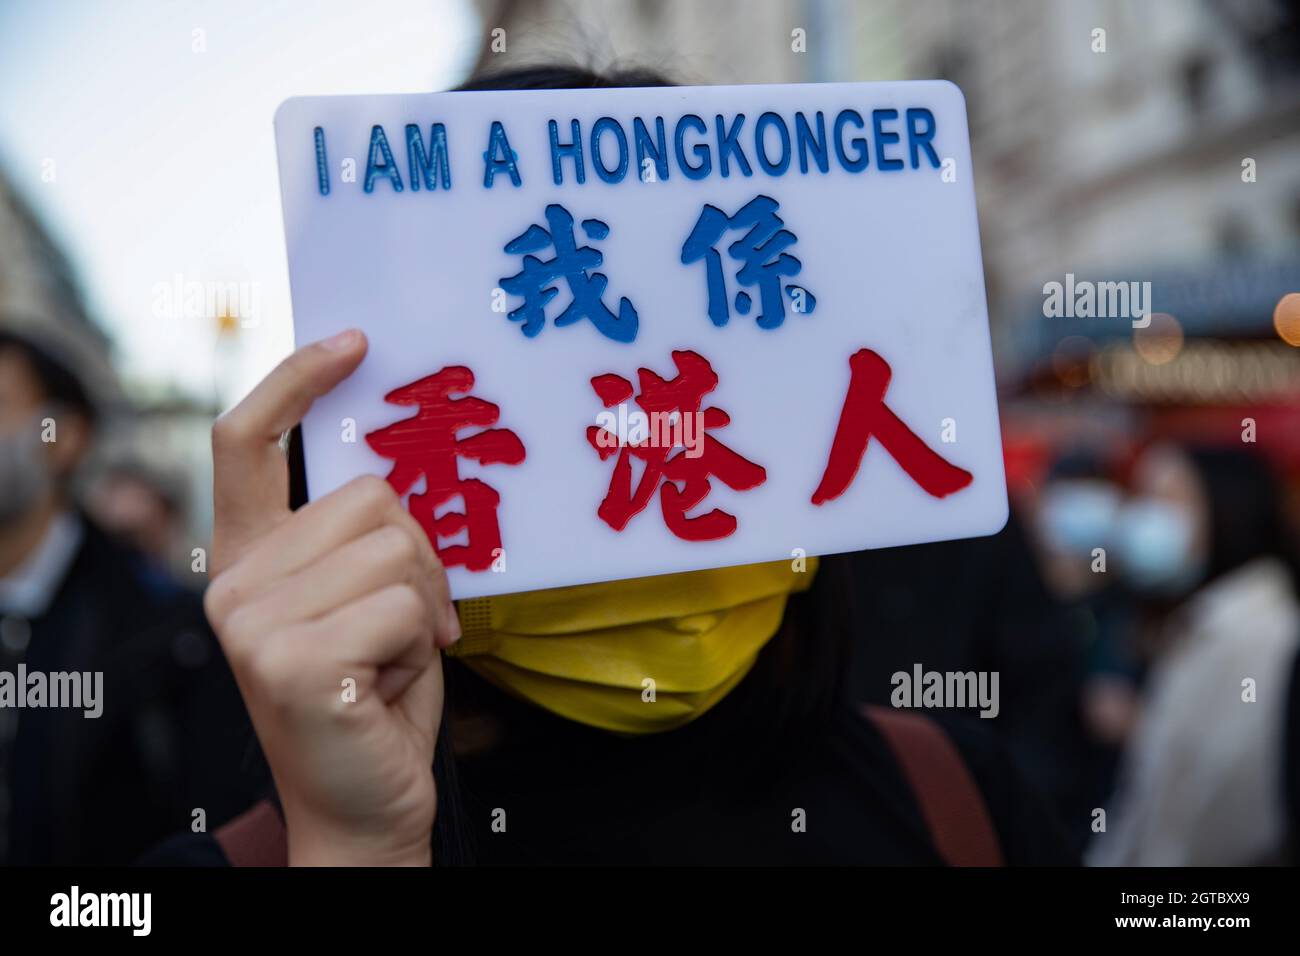 London, UK. 01st Oct, 2021. A demonstrator holds a sign reading 'I am a HongKonger' during the protest against Chinese Communist Party repression on Hong Kong, Tibet, and Xinjiang on China's National Day outside the Chinese Embassy in London.Hongkongers, Tibetans, and Uyghurs communities held a joint rally and march in London to protest against the celebration of the 72th anniversary of the National Day of the People's Republic of China. The rally started on Piccadilly Circus and called the public to join the petition to boycott the Winter Olympics which is going to be held in Beijing next yea Stock Photo